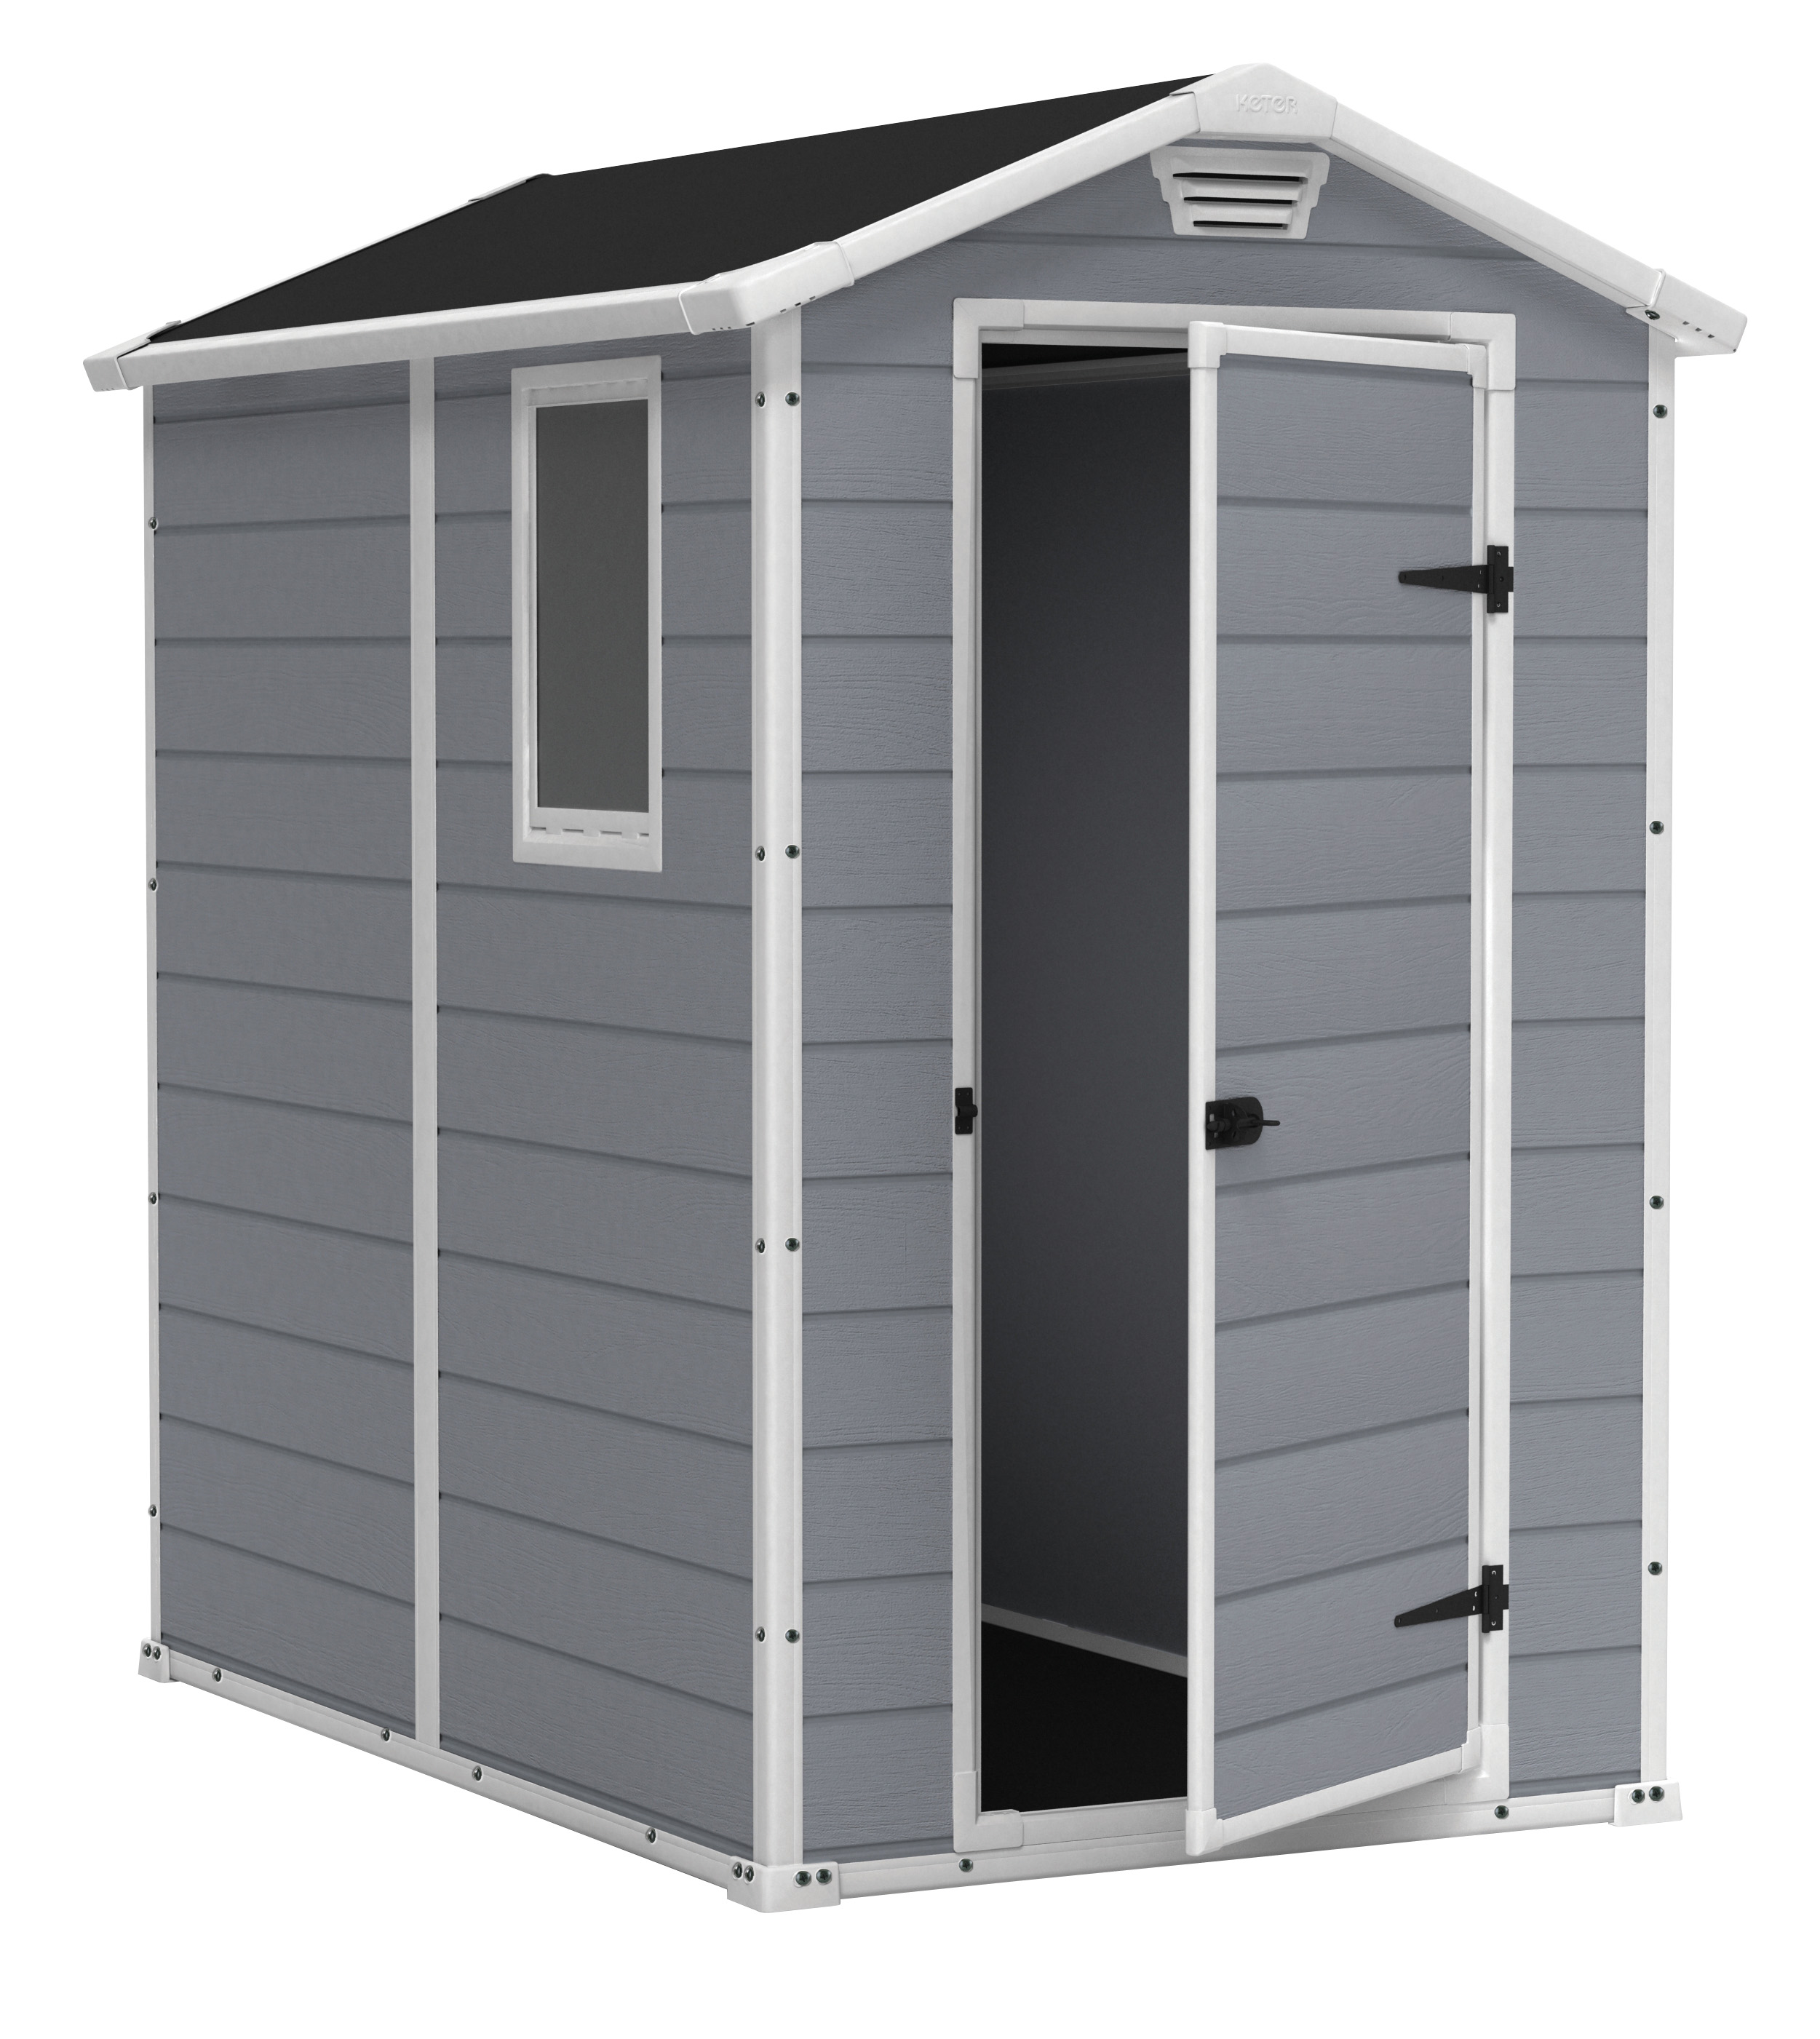 Keter Manor 4' x 6' Resin Storage Shed, All-Weather Plastic Outdoor Storage, Gray and White - image 1 of 10